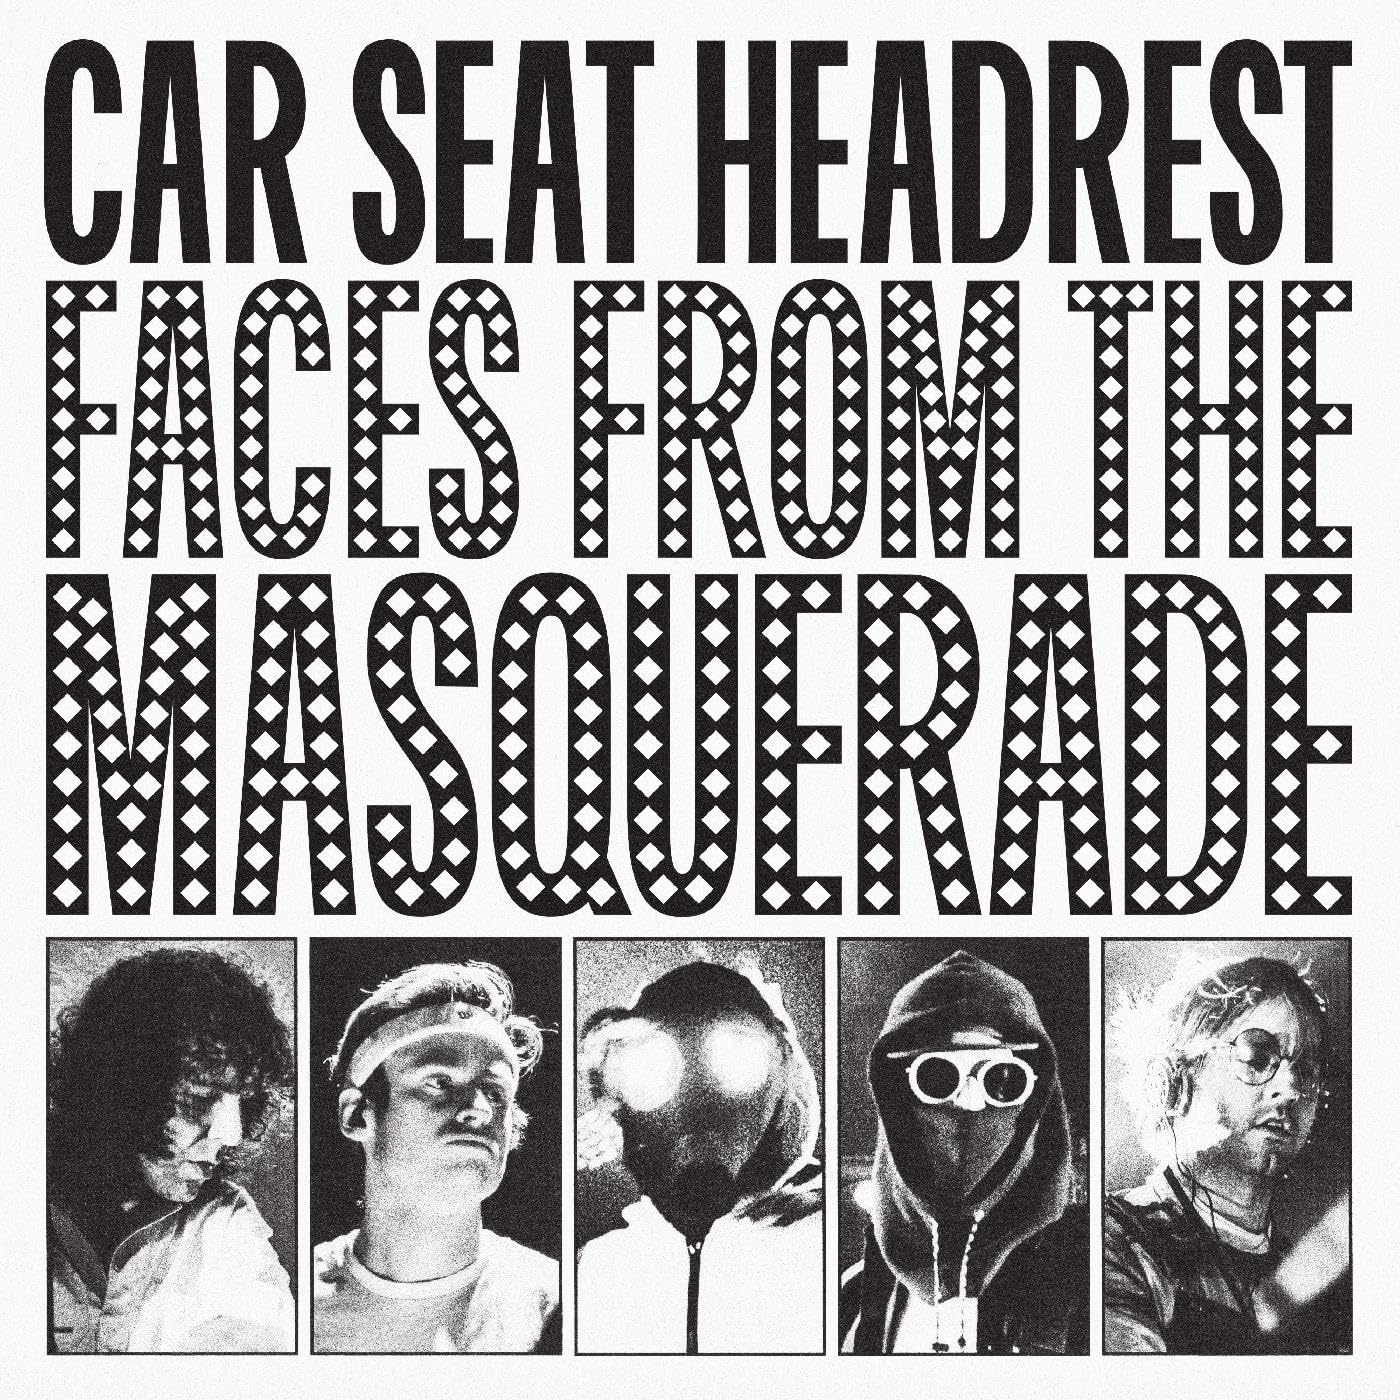 Car Seat Headrest - Faces From The Masquerade vinyl cover